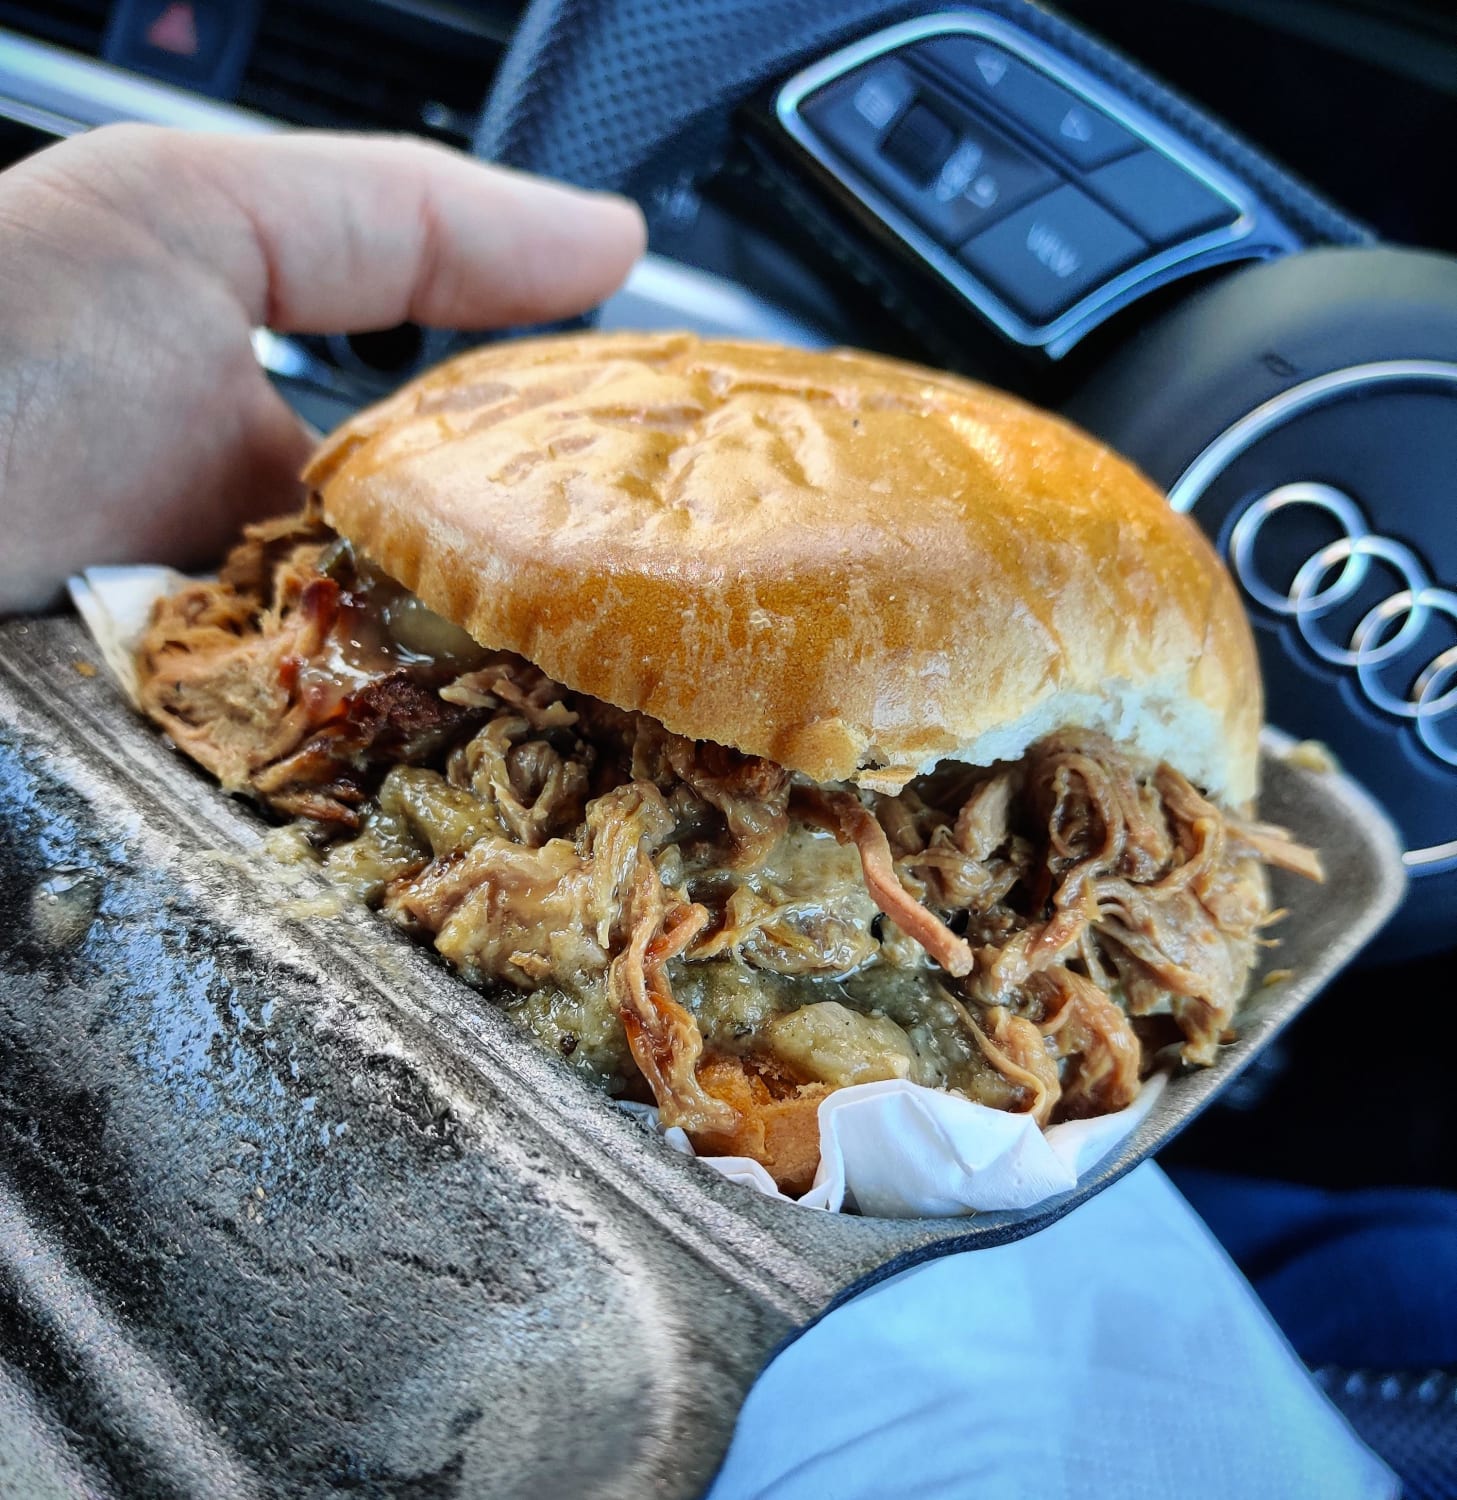 Restaurants still closed, still working remotely. This was my "work Christmas party" this year - roast pork shoulder, stuffing, apple sauce, gravy, on a roll, from a local food truck.